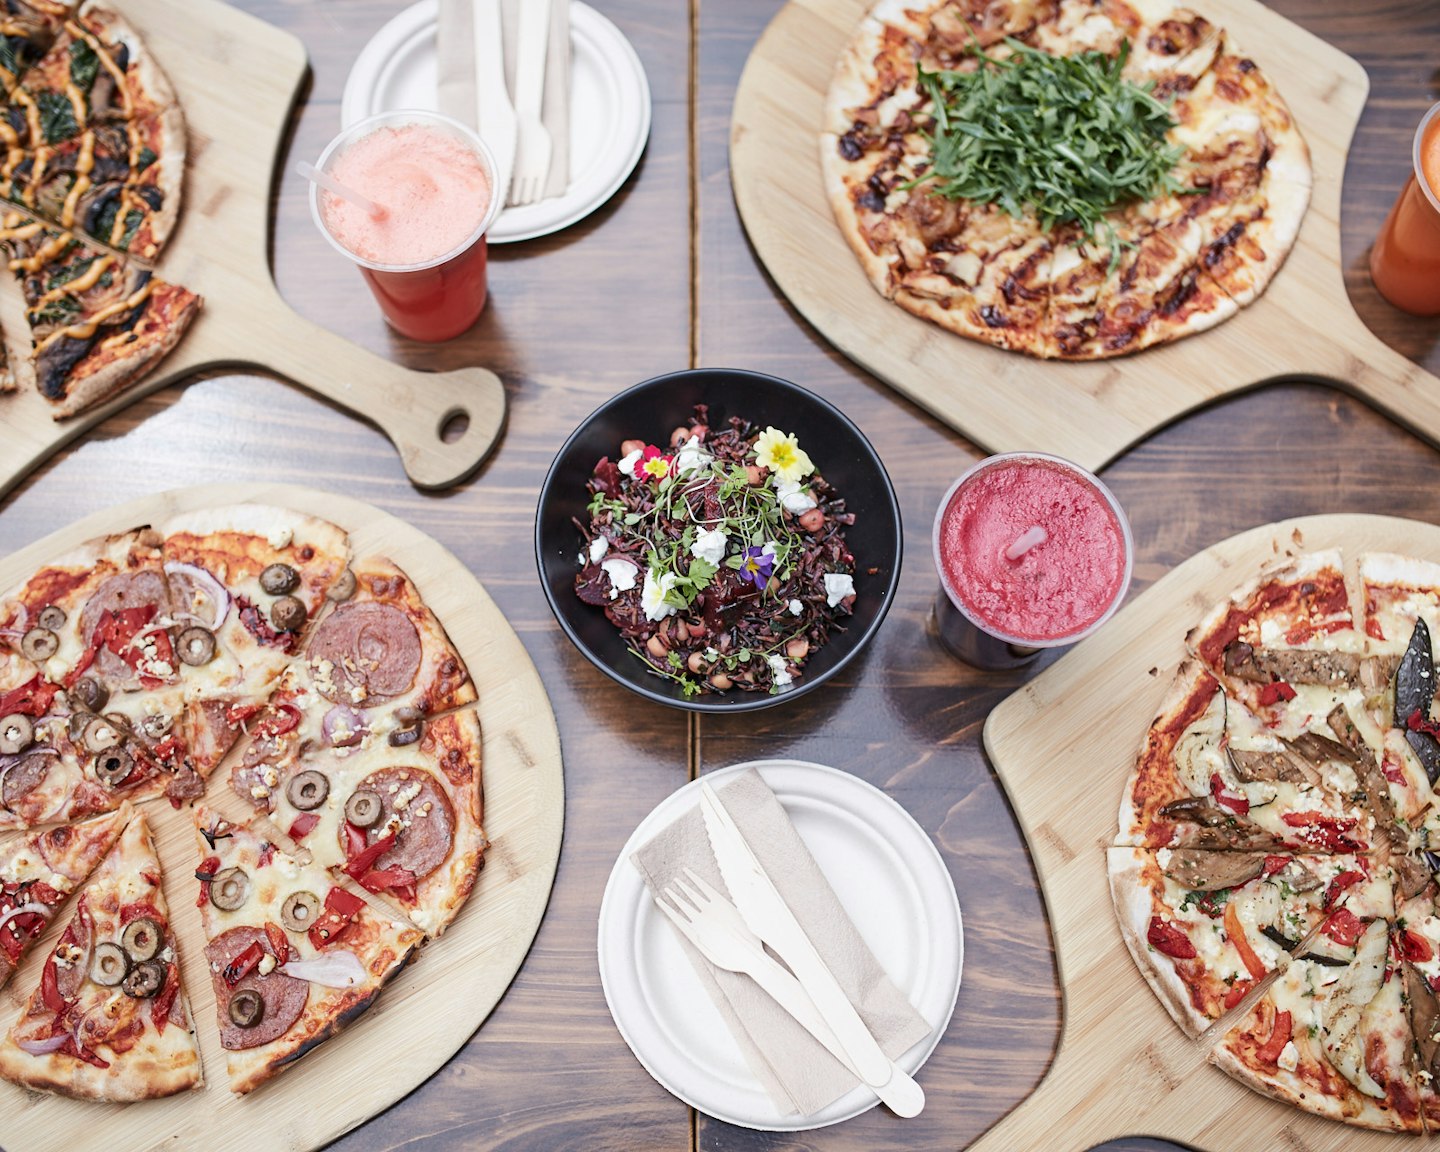 cafe table laden with pizzas on wooden boards, fresh salad and cold pressed juices